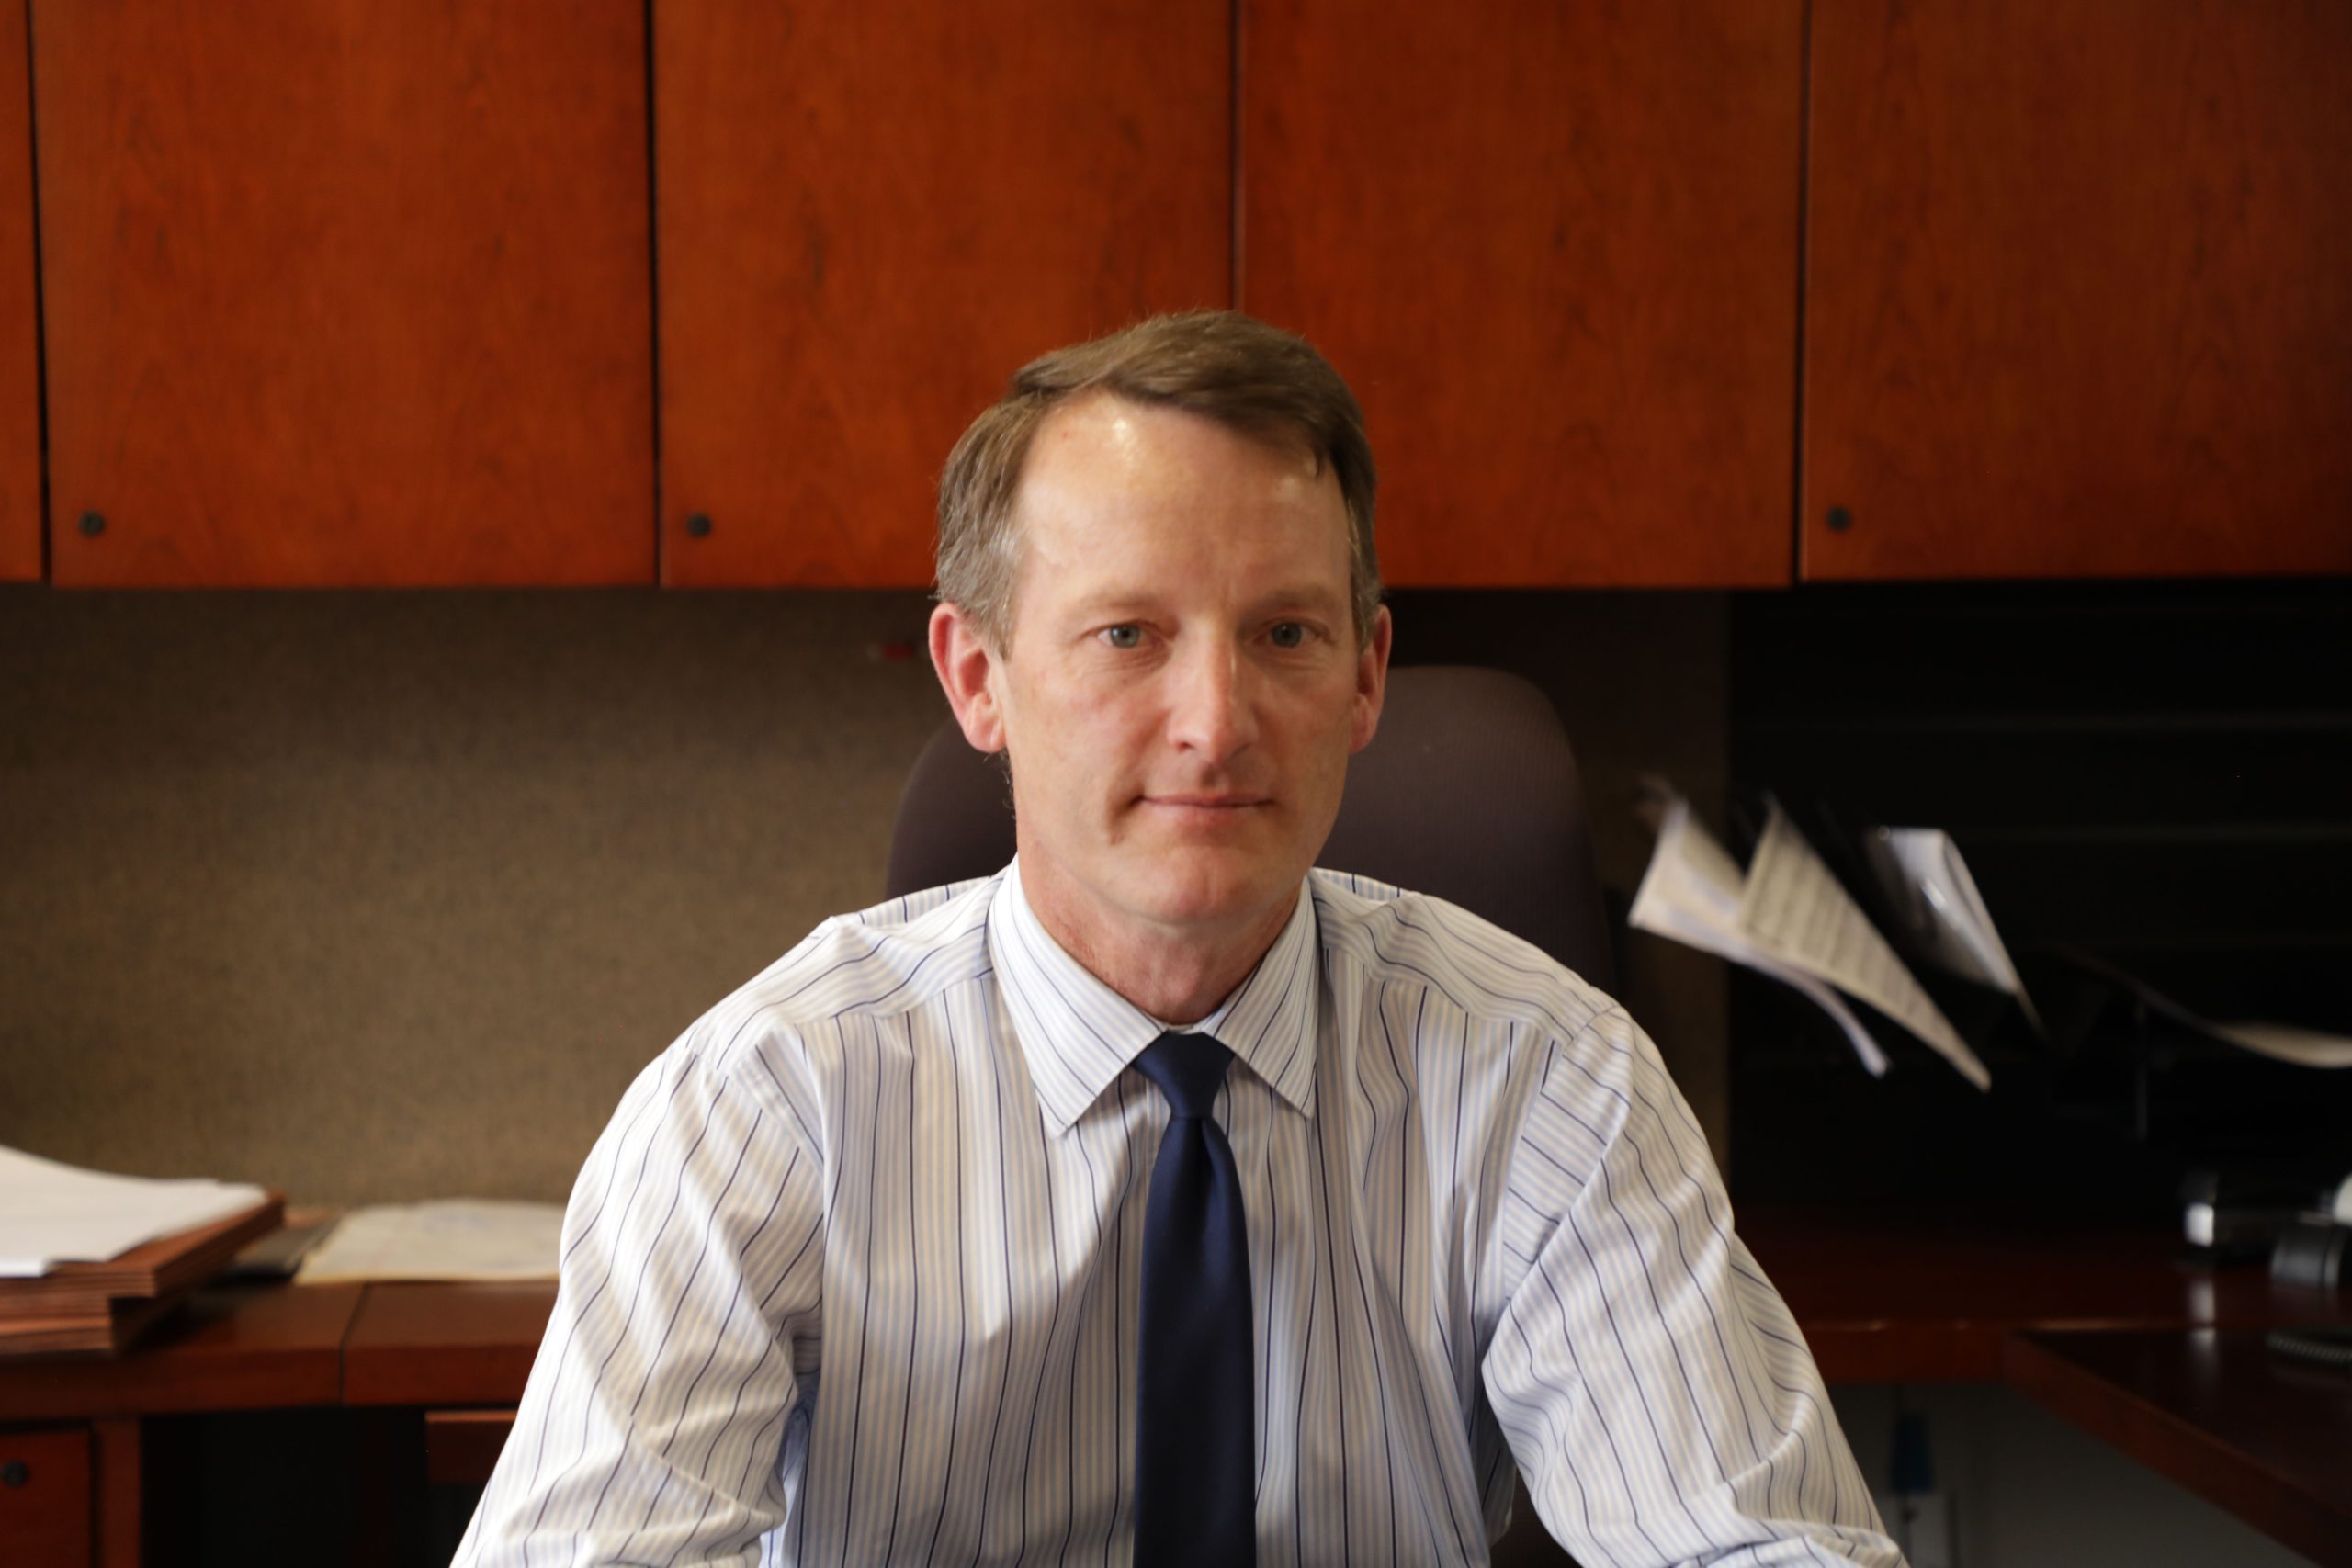 Jason Dunn as U.S. Attorney for the District of Colorado